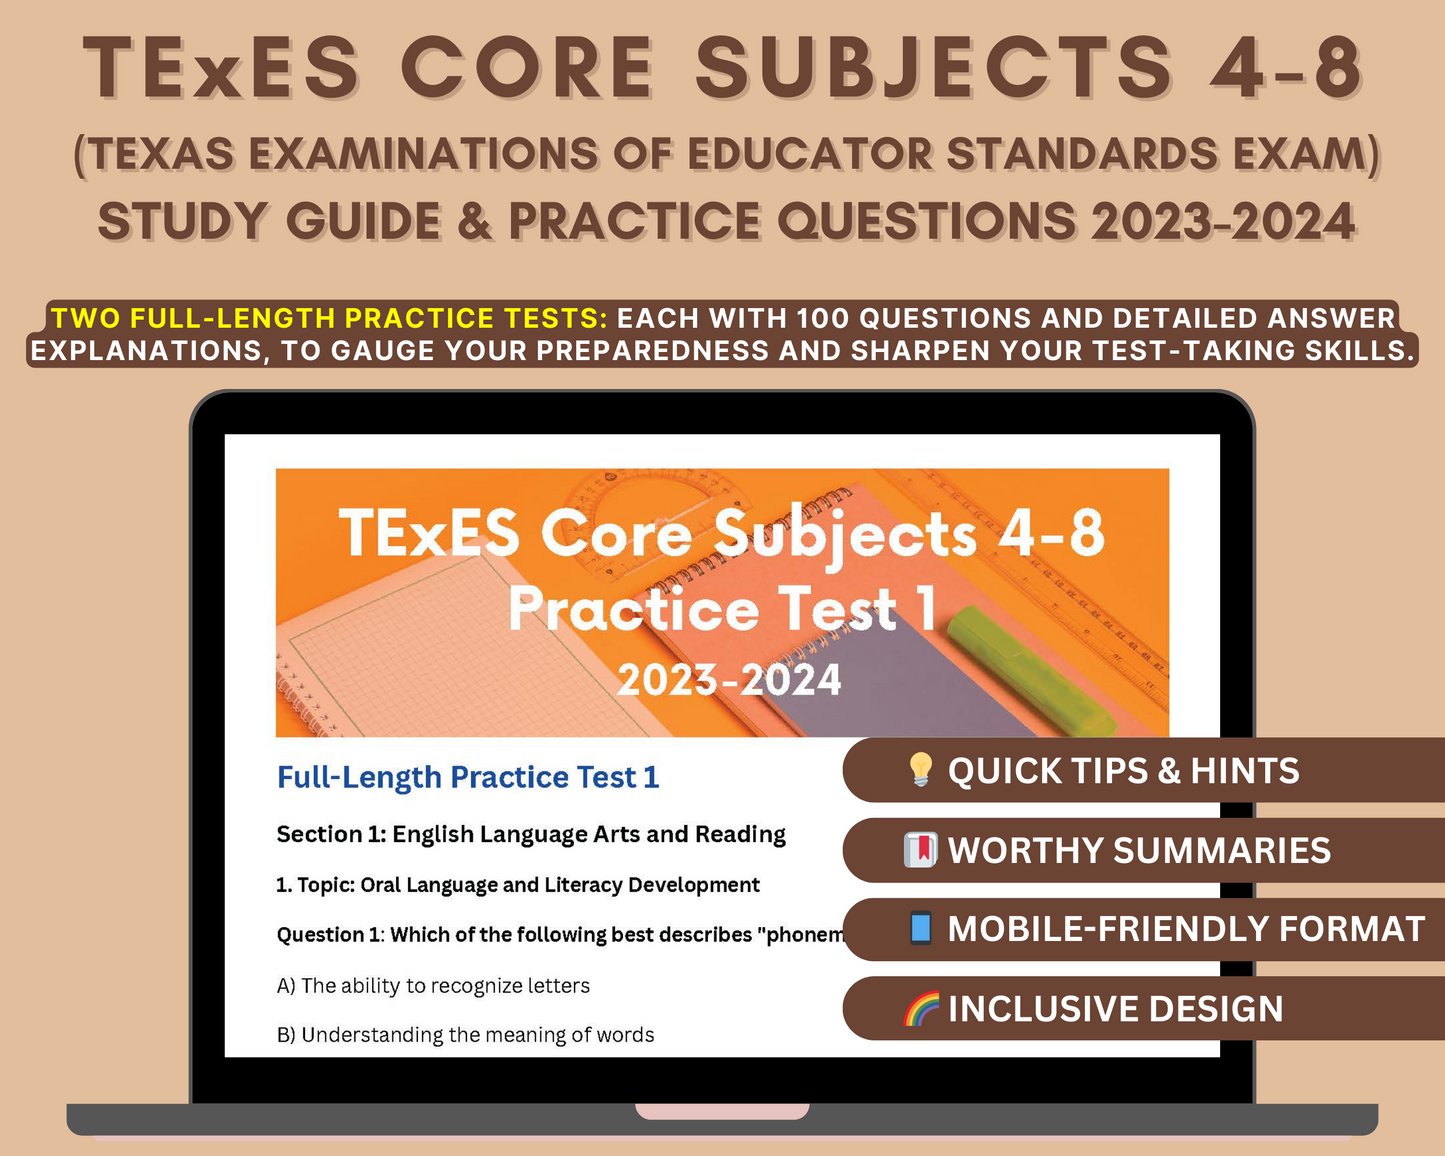 TExES Core Subjects 4-8 (211) Study Guide 2023-2024: In-Depth Review, Practice Tests for Texas Educator Certification